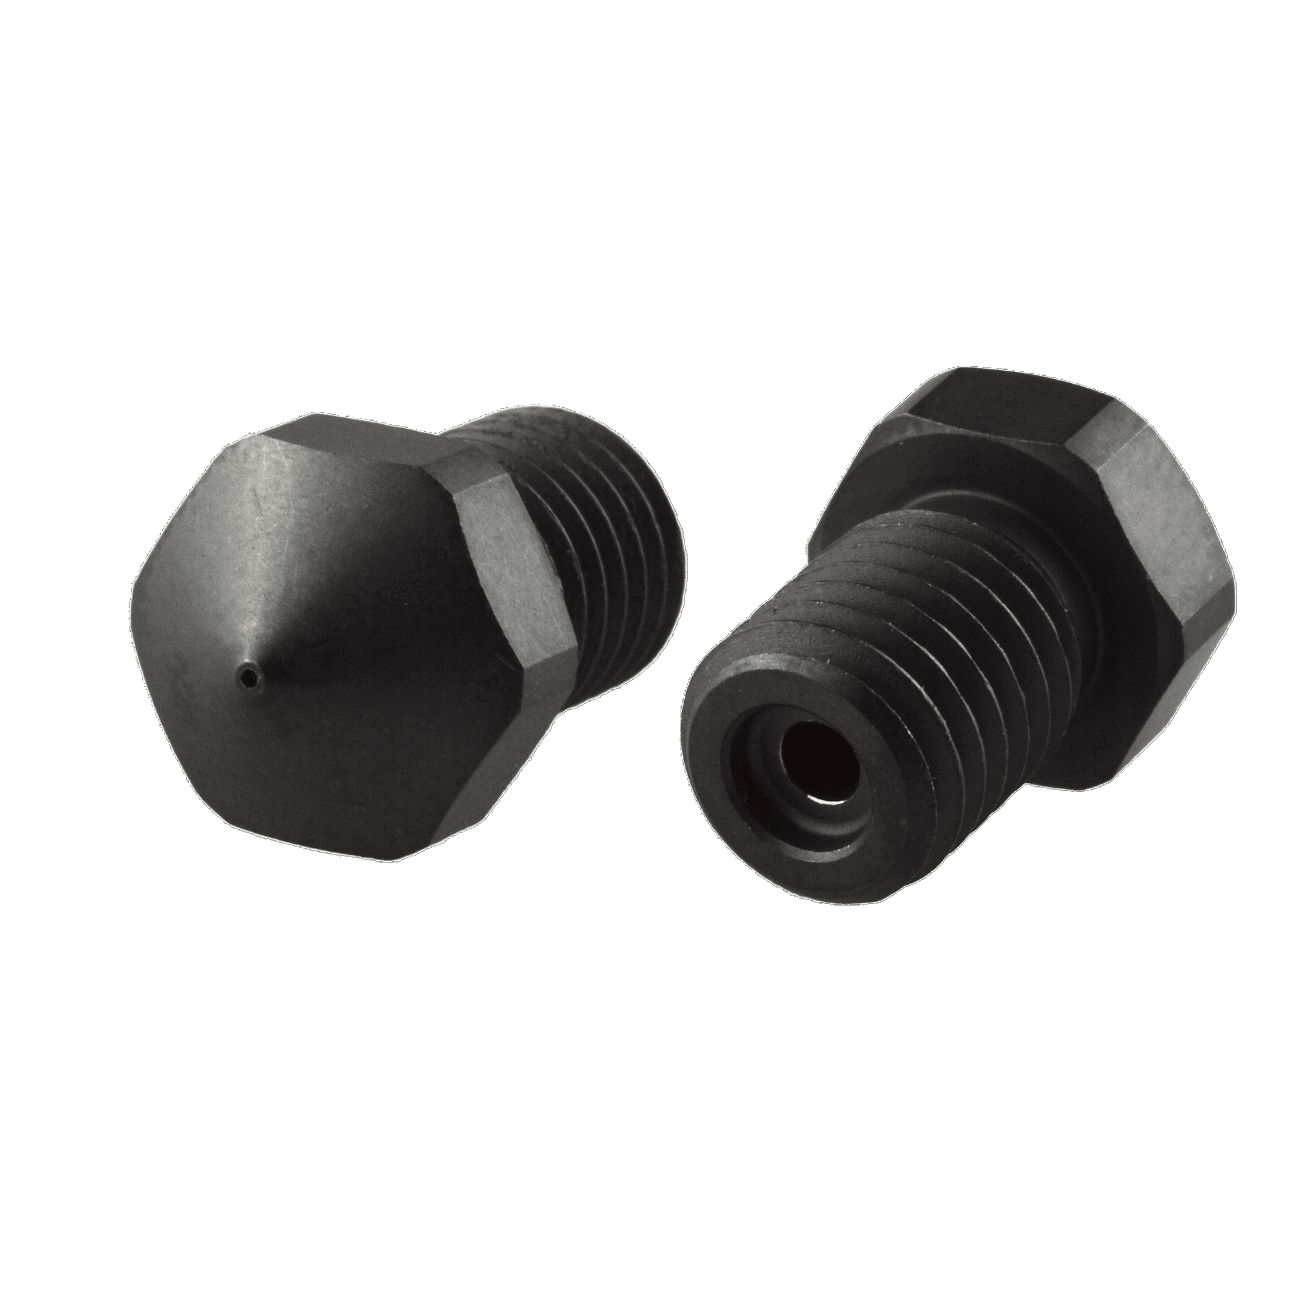 Flashforge Guider 2s Hardened Nozzle for High Temp. Hot-End 0.6 mm